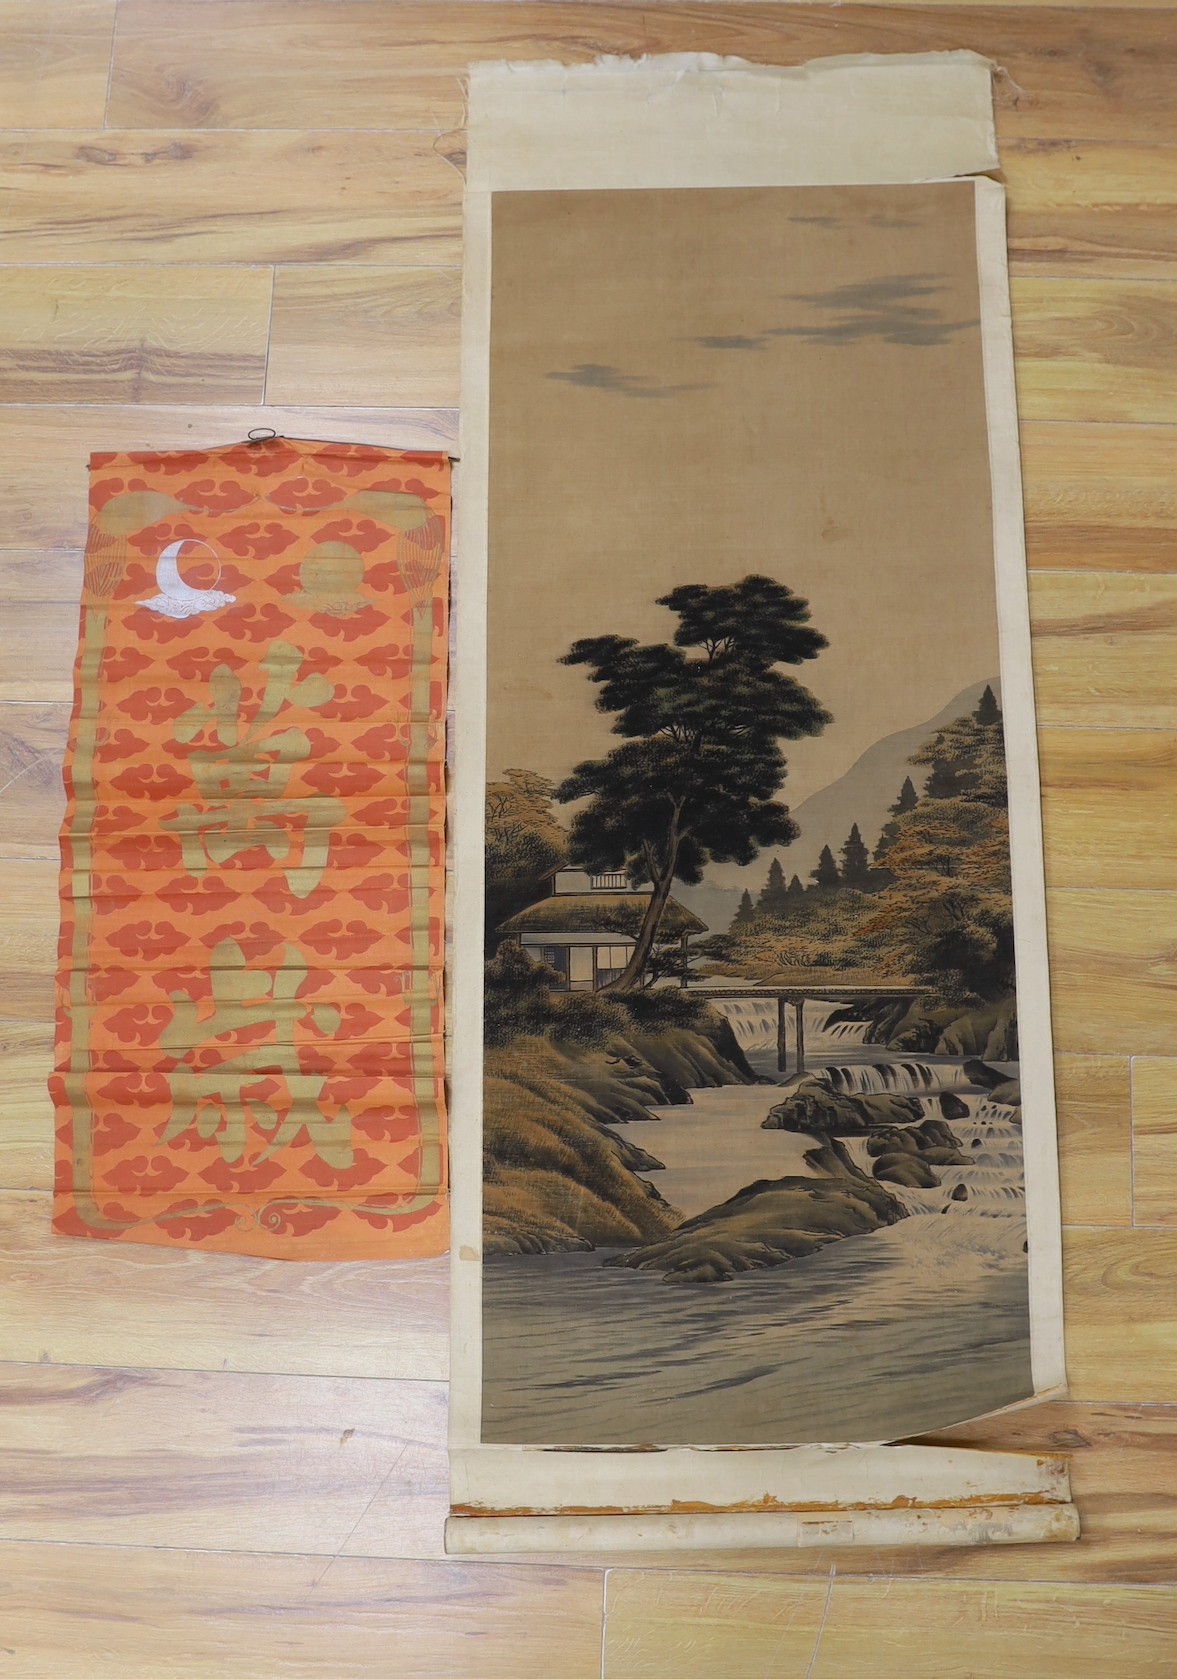 A Chinese calligraphic fabric hanging, 90 x 37cm, together with an early 20th century Japanese painted felt and watercolour landscape scroll